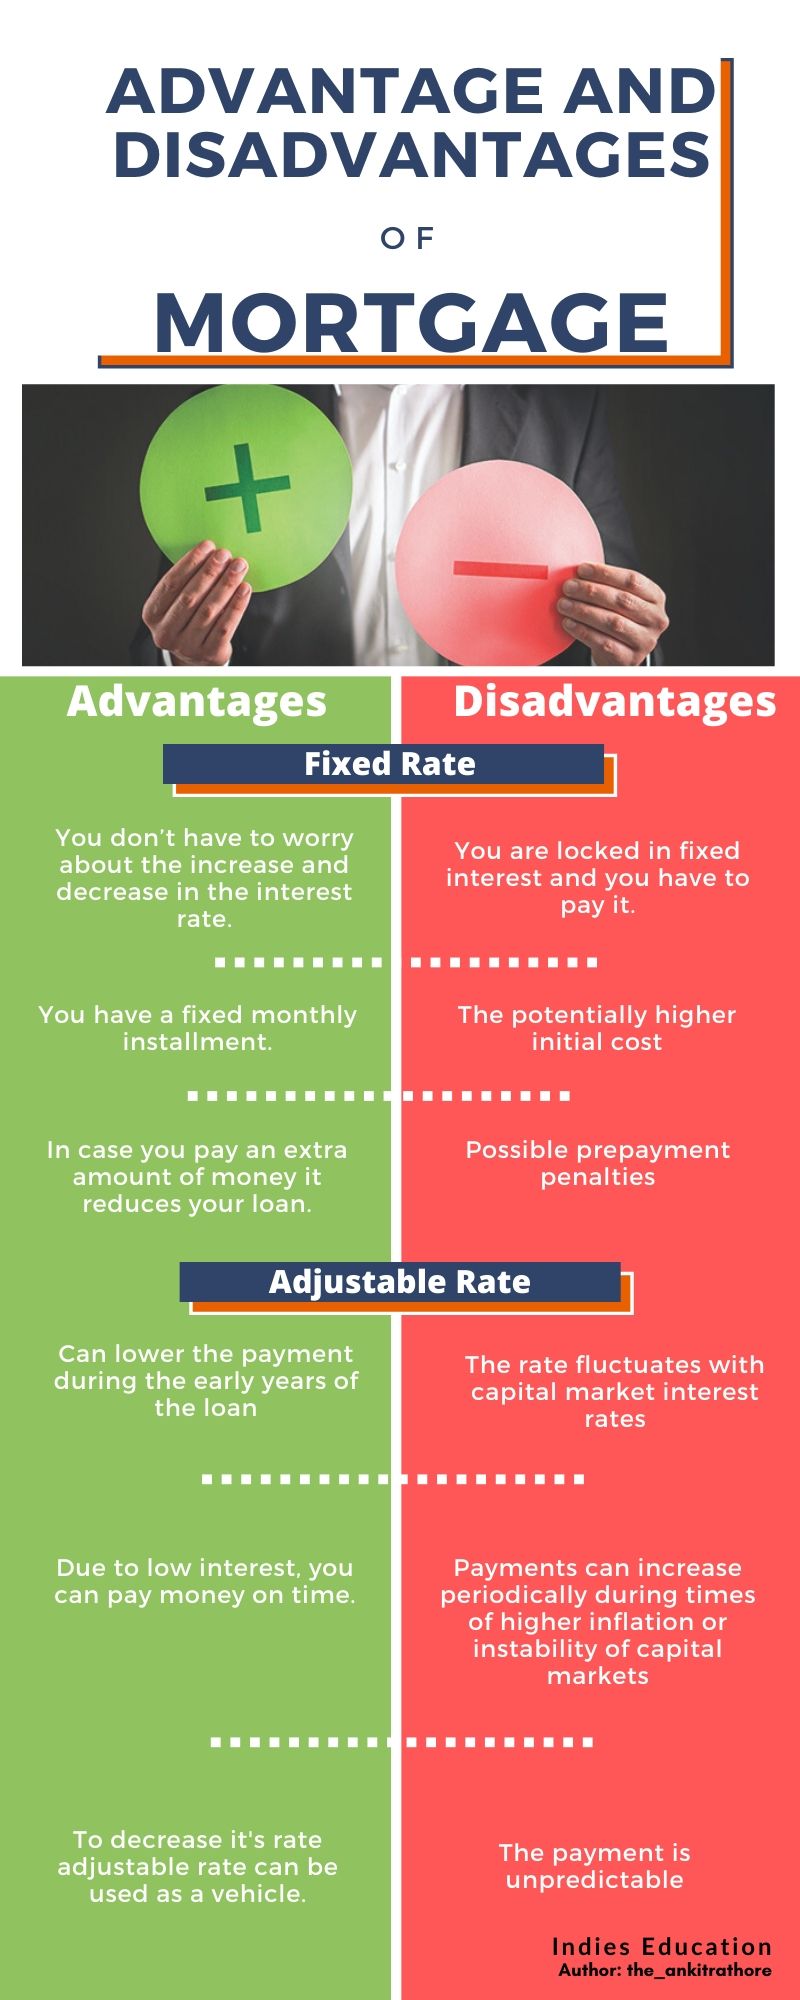 Advantage and Disadvantage between fixed-rate and adjustable Mortgage: